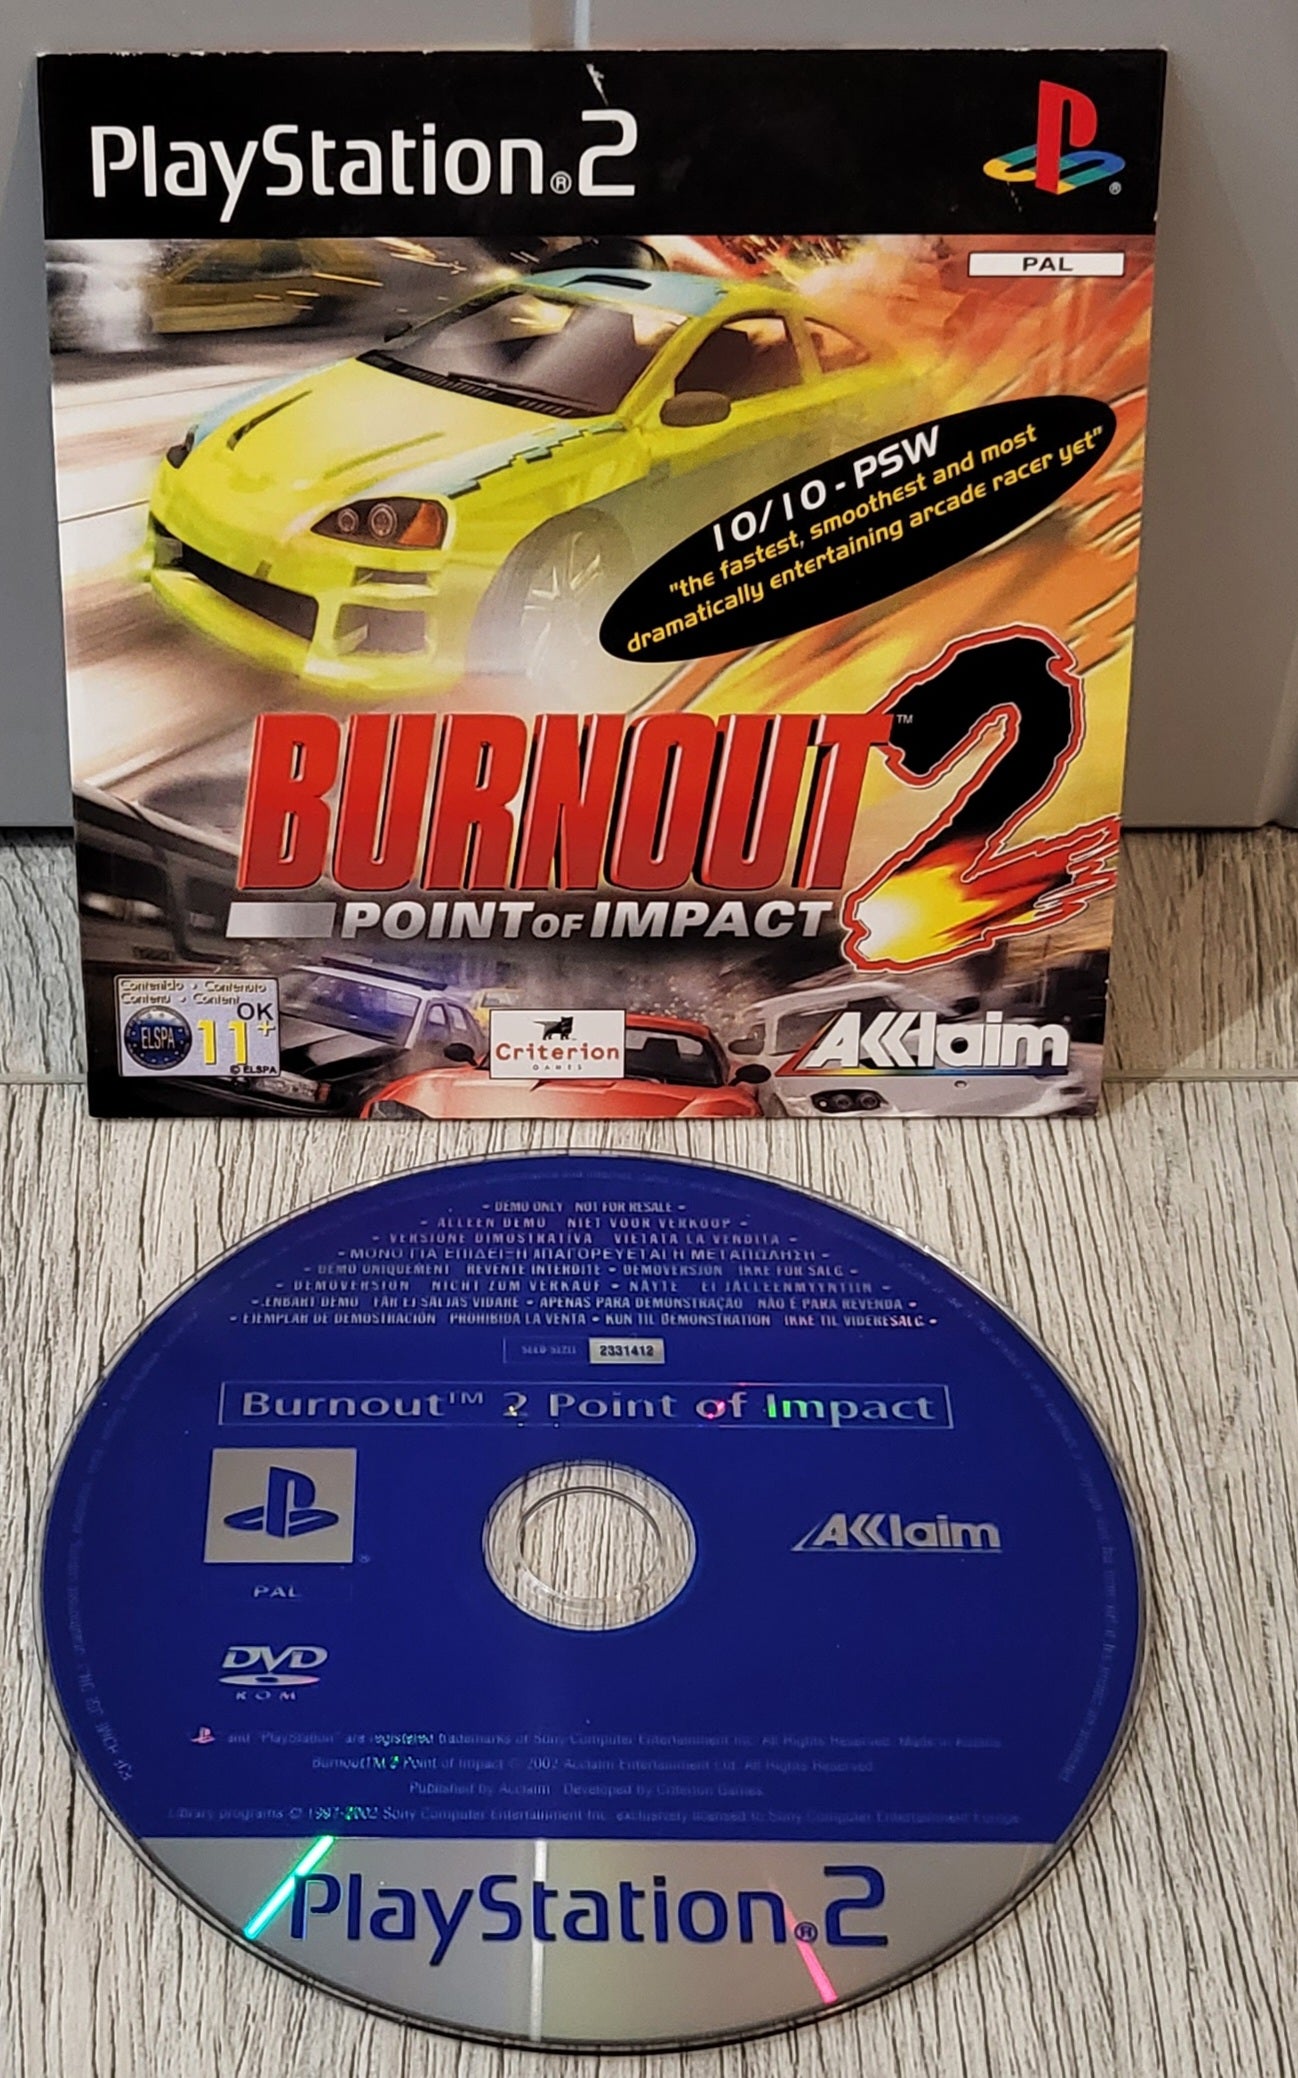 Burnout 2 Sony Playstation 2 (PS2) Demo Disc